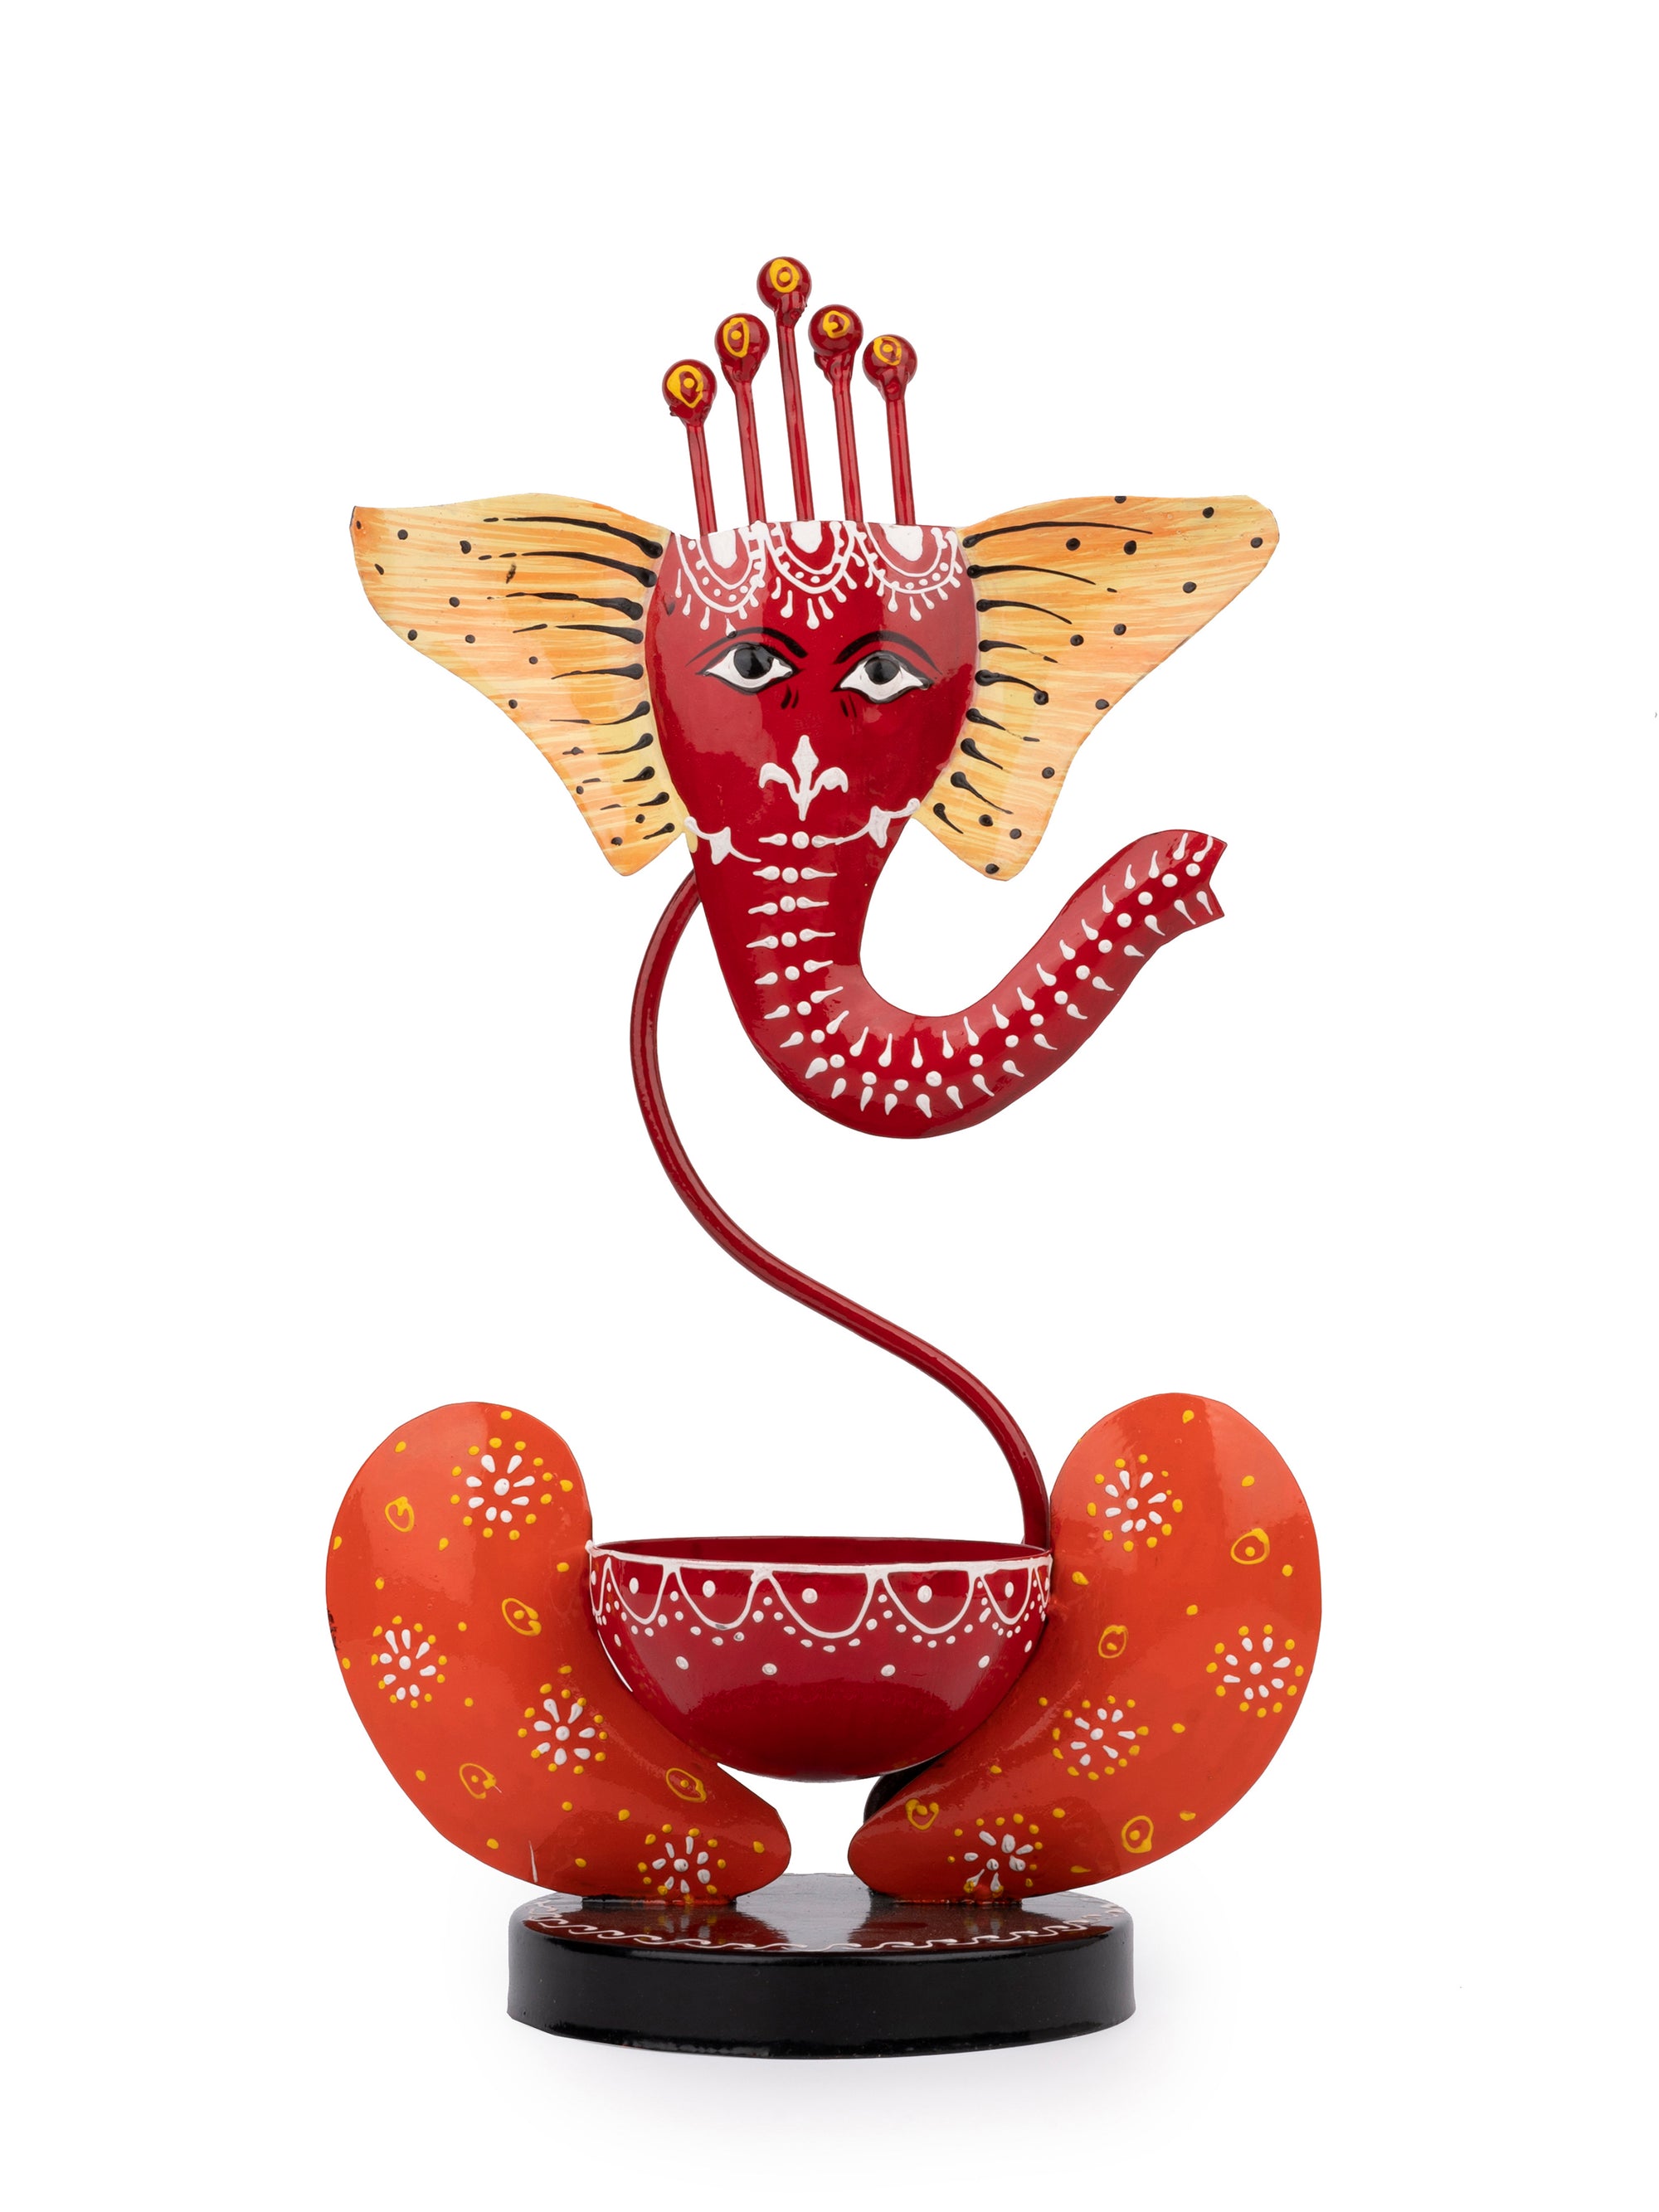 Handcrafted Metal Ganesh Tea light Holder in Red Color - 12 inches height - The Heritage Artifacts